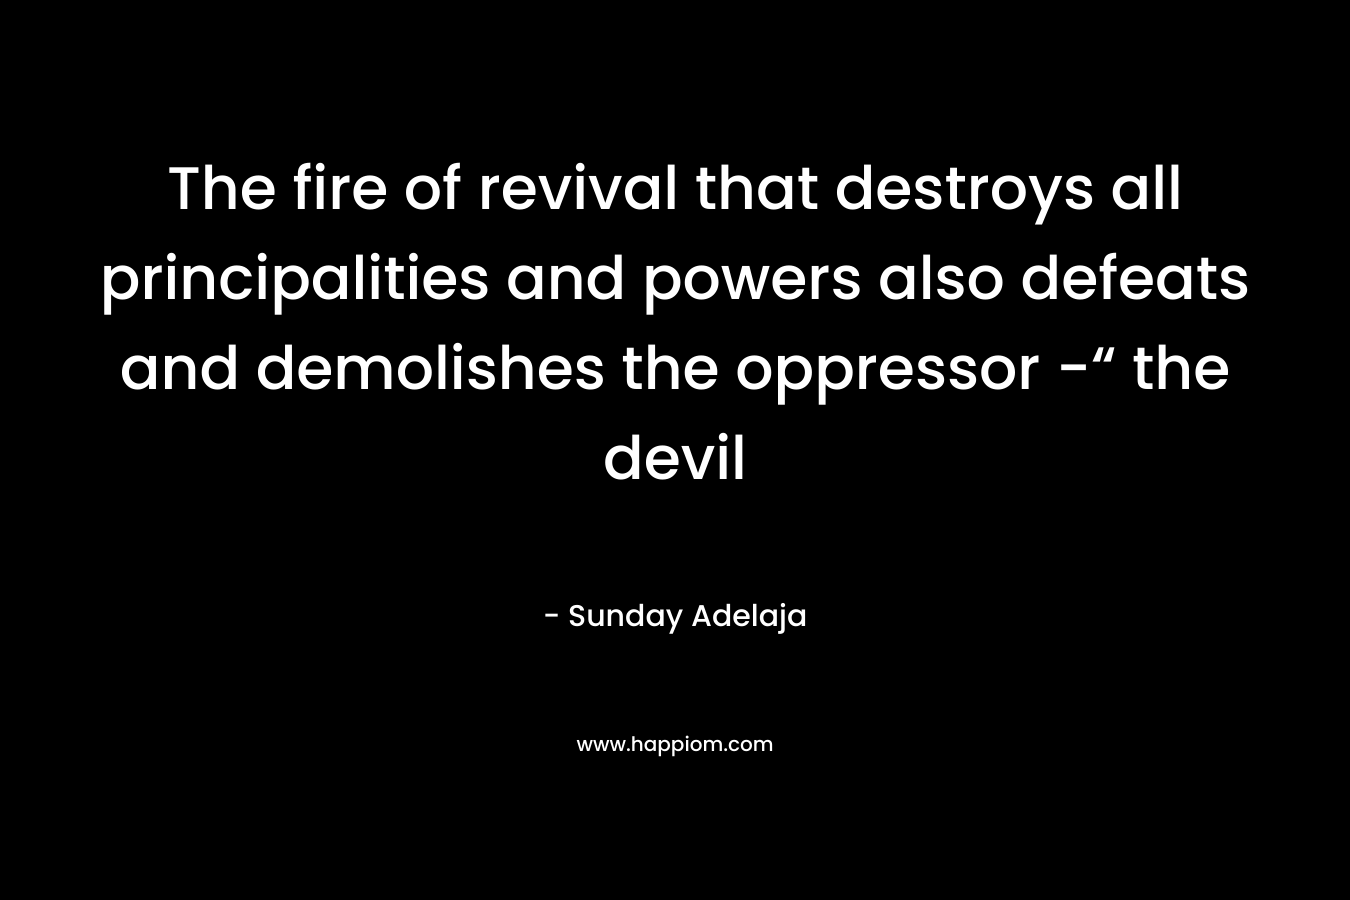 The fire of revival that destroys all principalities and powers also defeats and demolishes the oppressor -“ the devil – Sunday Adelaja